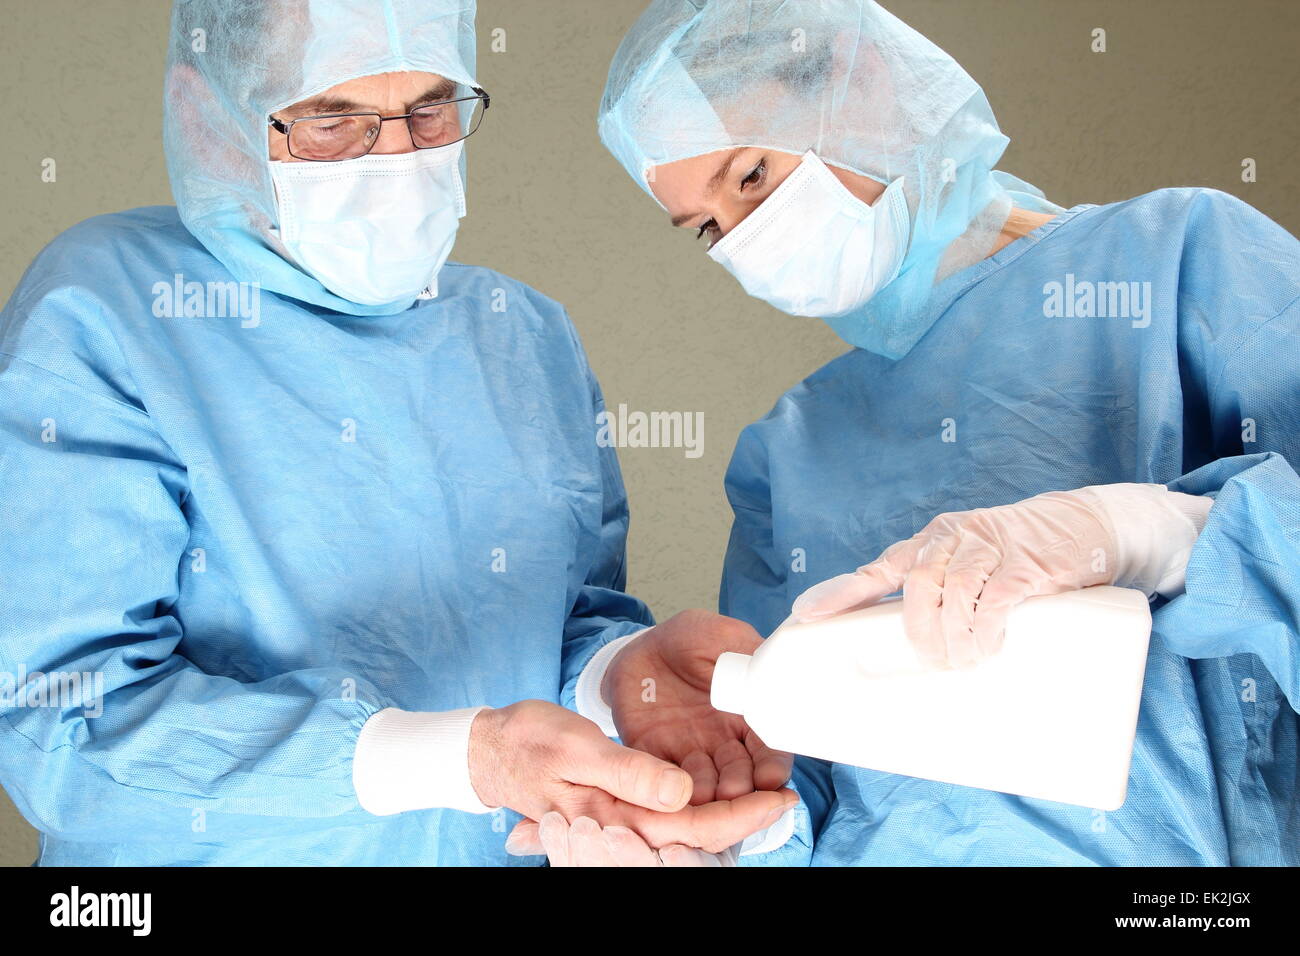 Two doctors during a dand disinfection in a op Stock Photo